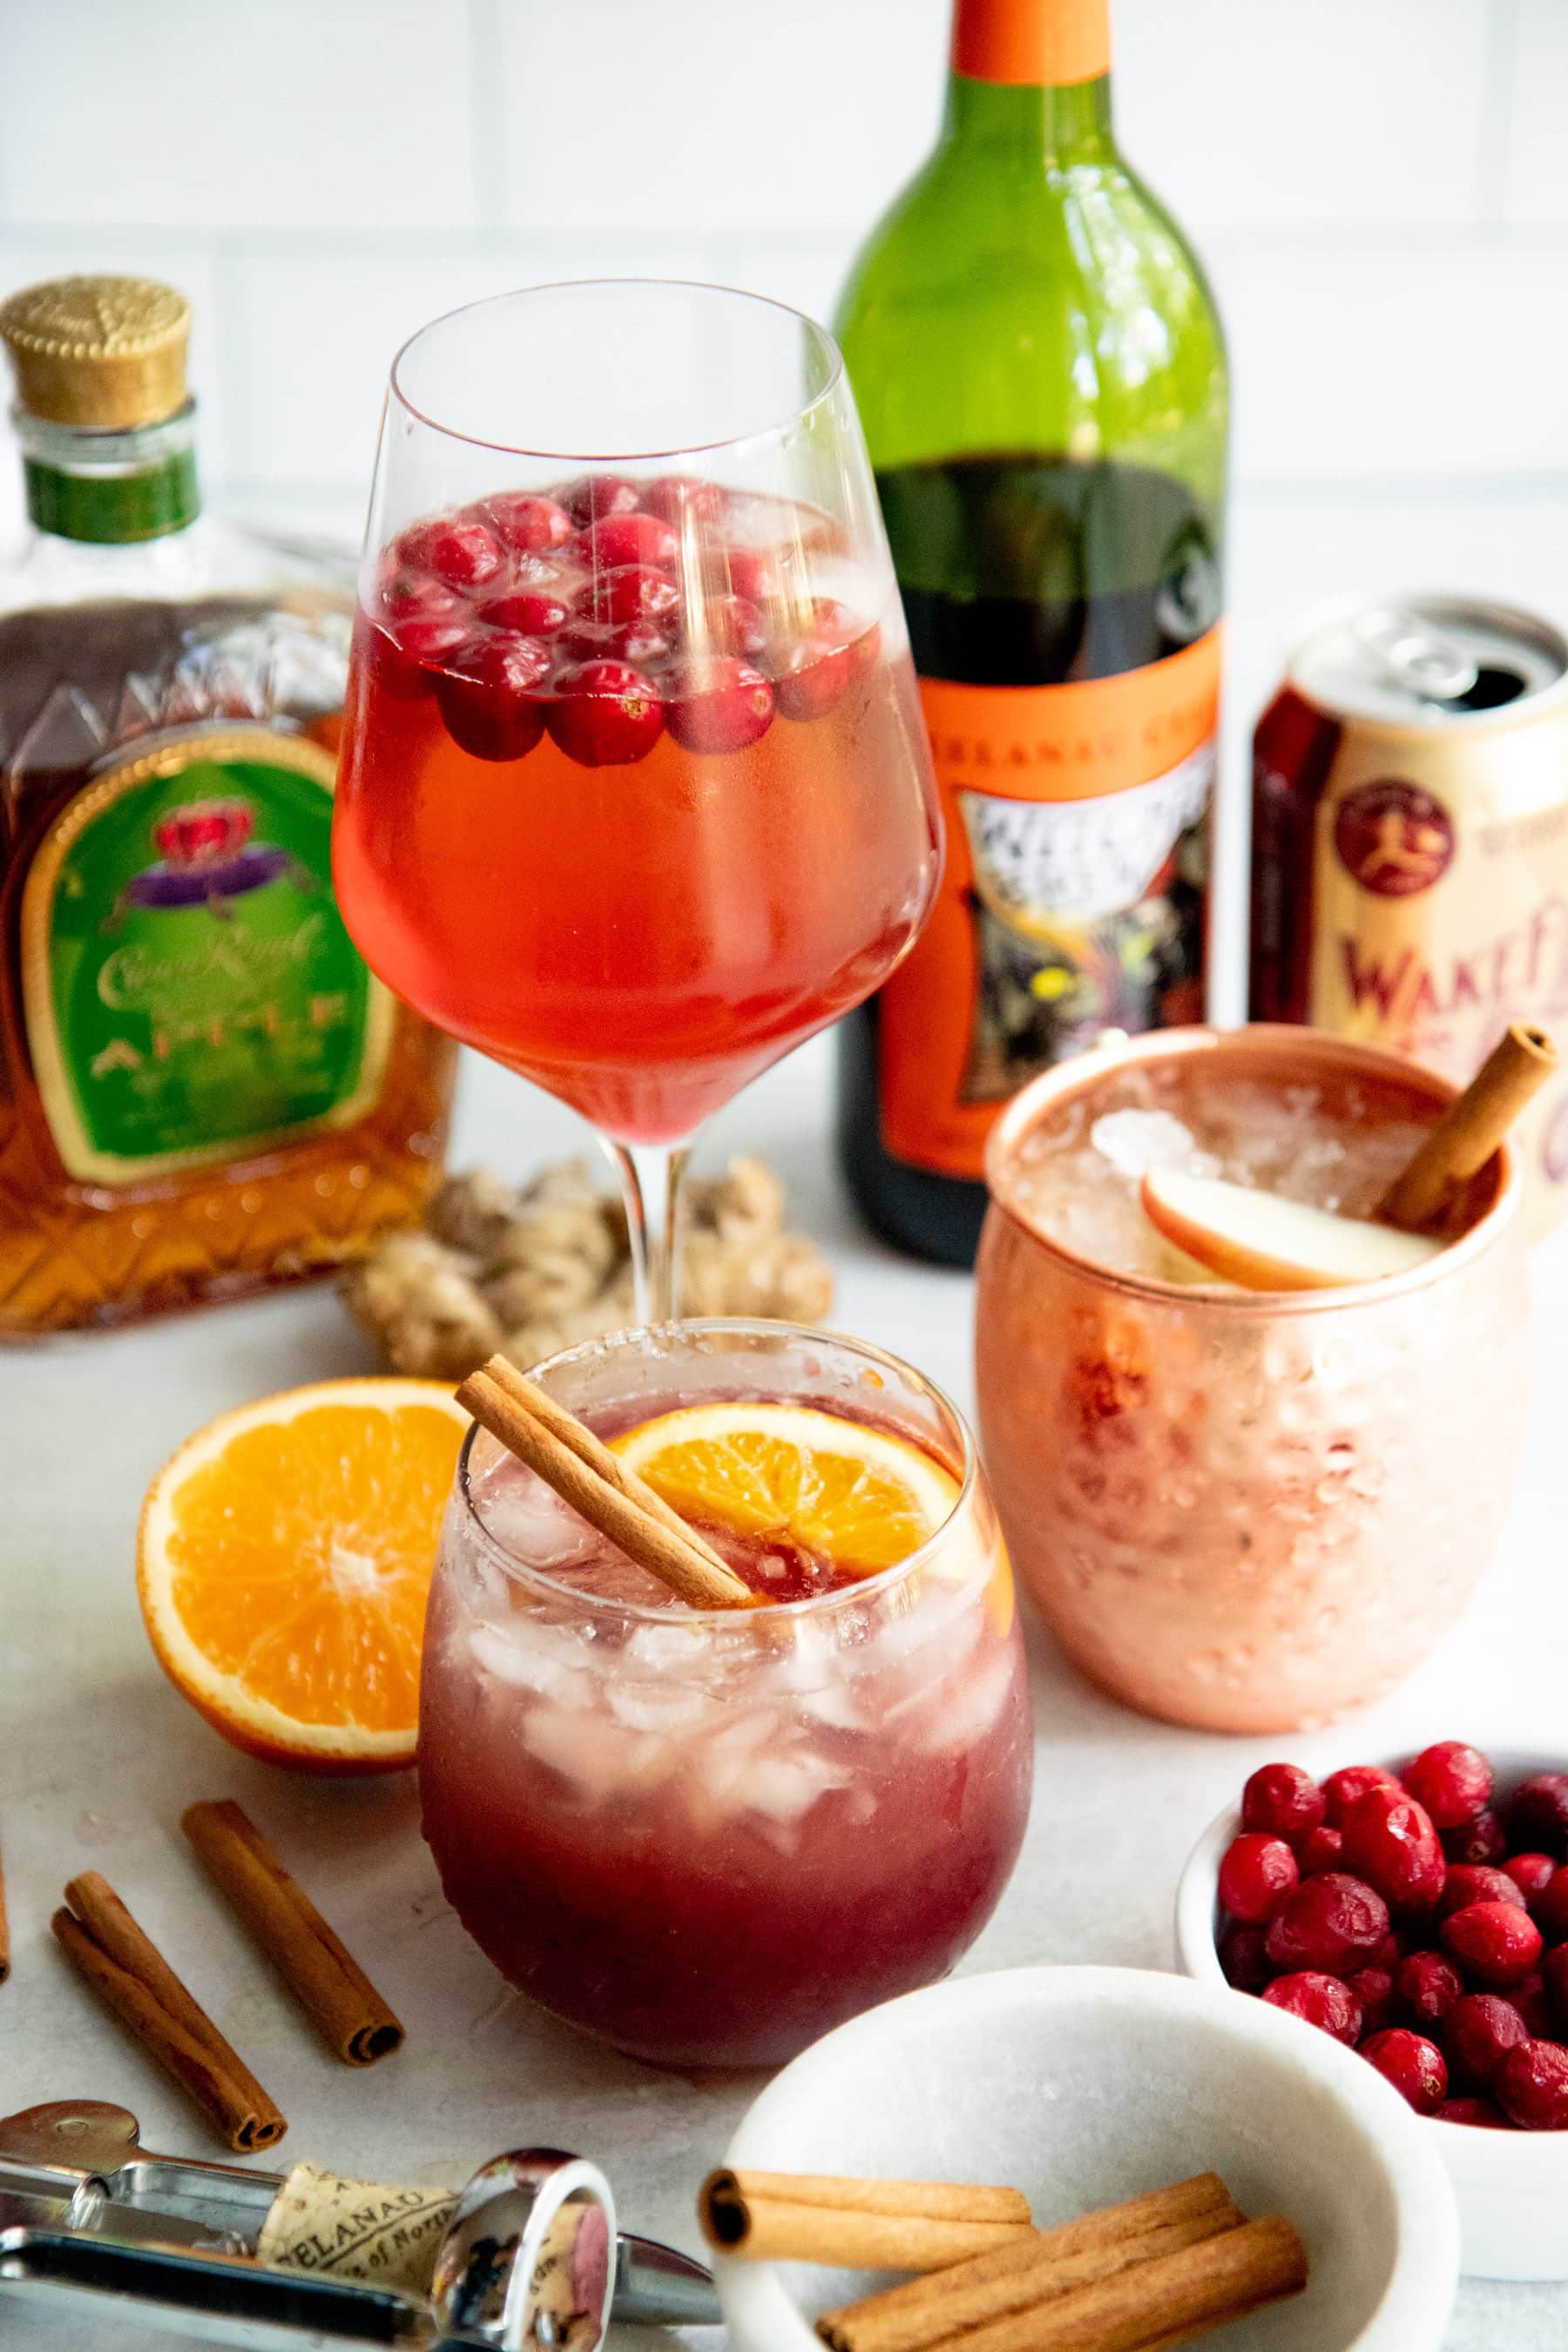 Three different cocktails surrounded by the ingredients to make them - cinnamon sticks, hard cider, whiskey, wine, cranberries, orange, ginger